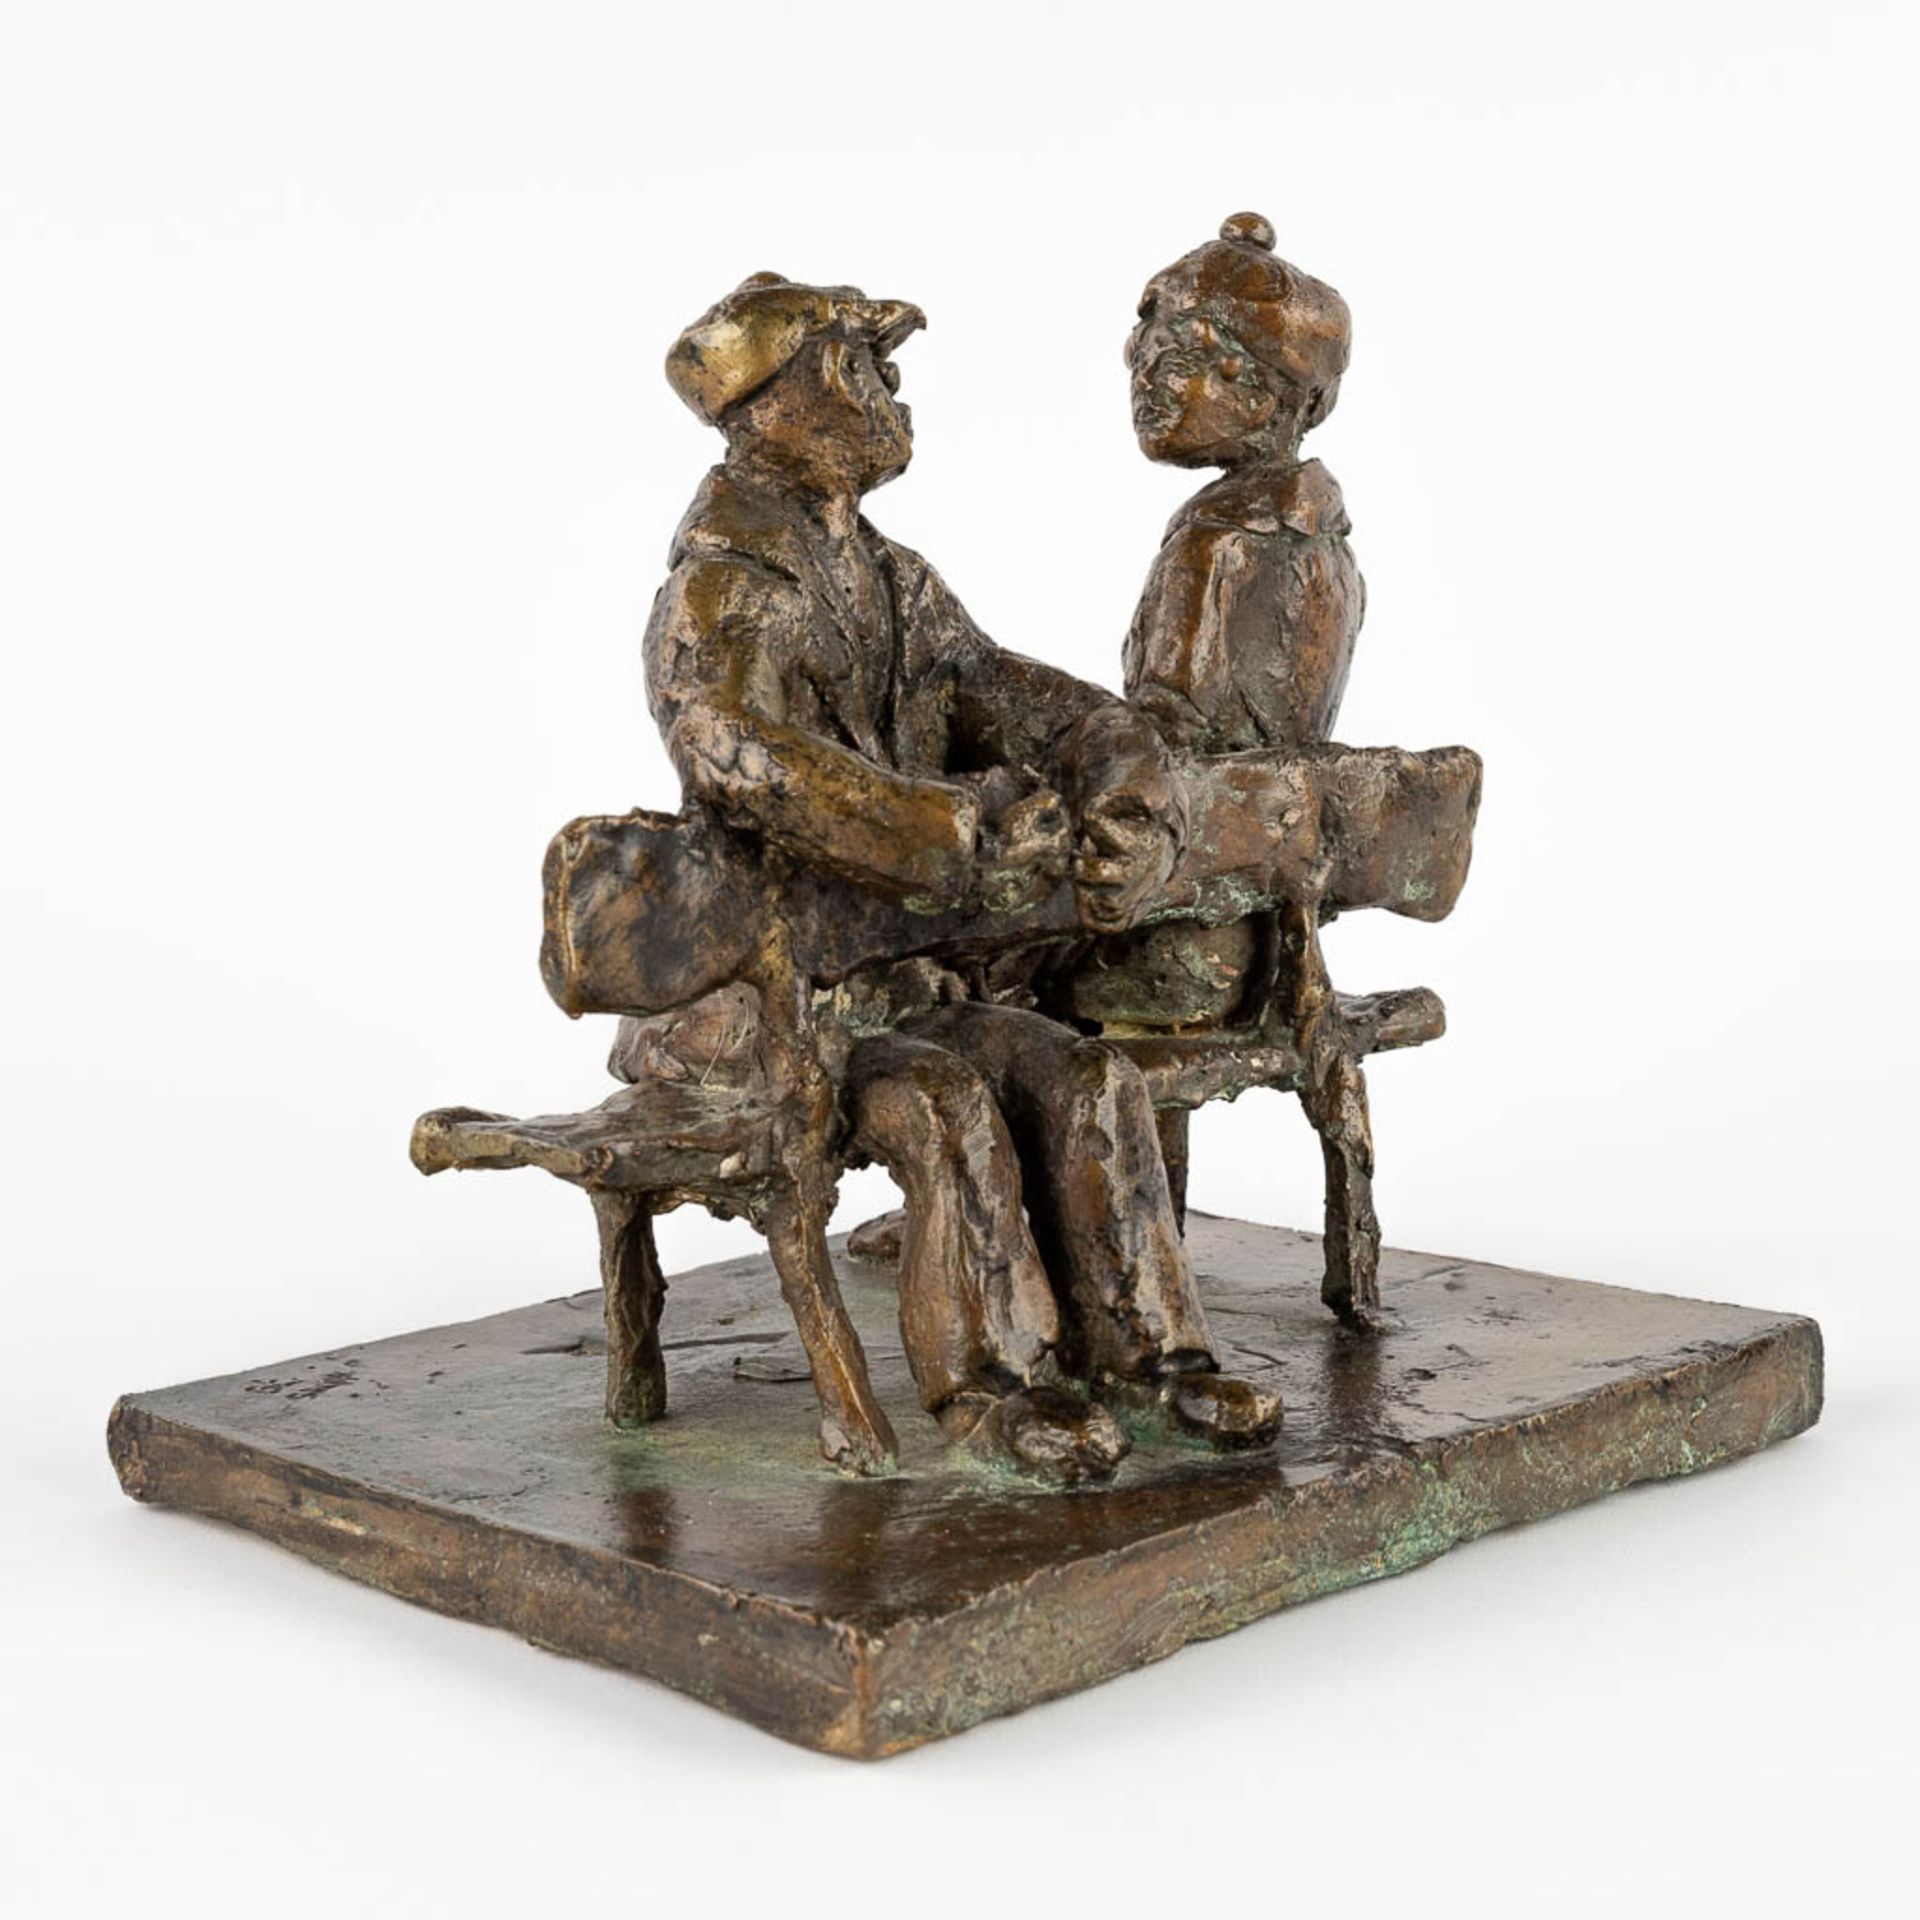 Jos WILMS (1930) 'The Bench' patinated bronze. (19)79. (D:18 x W:22 x H:20 cm) - Image 8 of 14